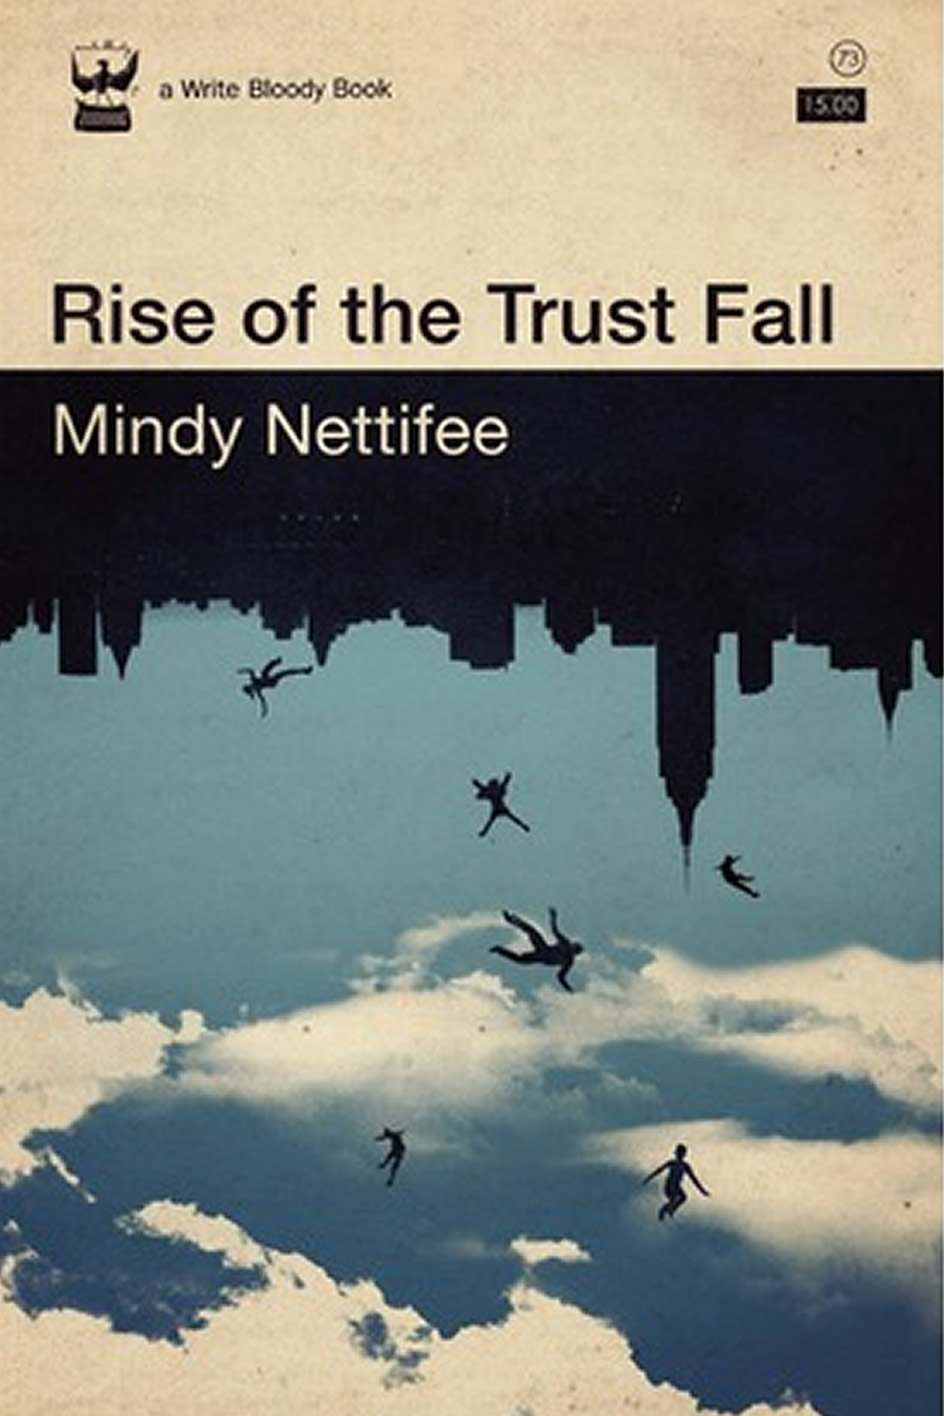 cover art for poetry collection Rise of the Trust Fall